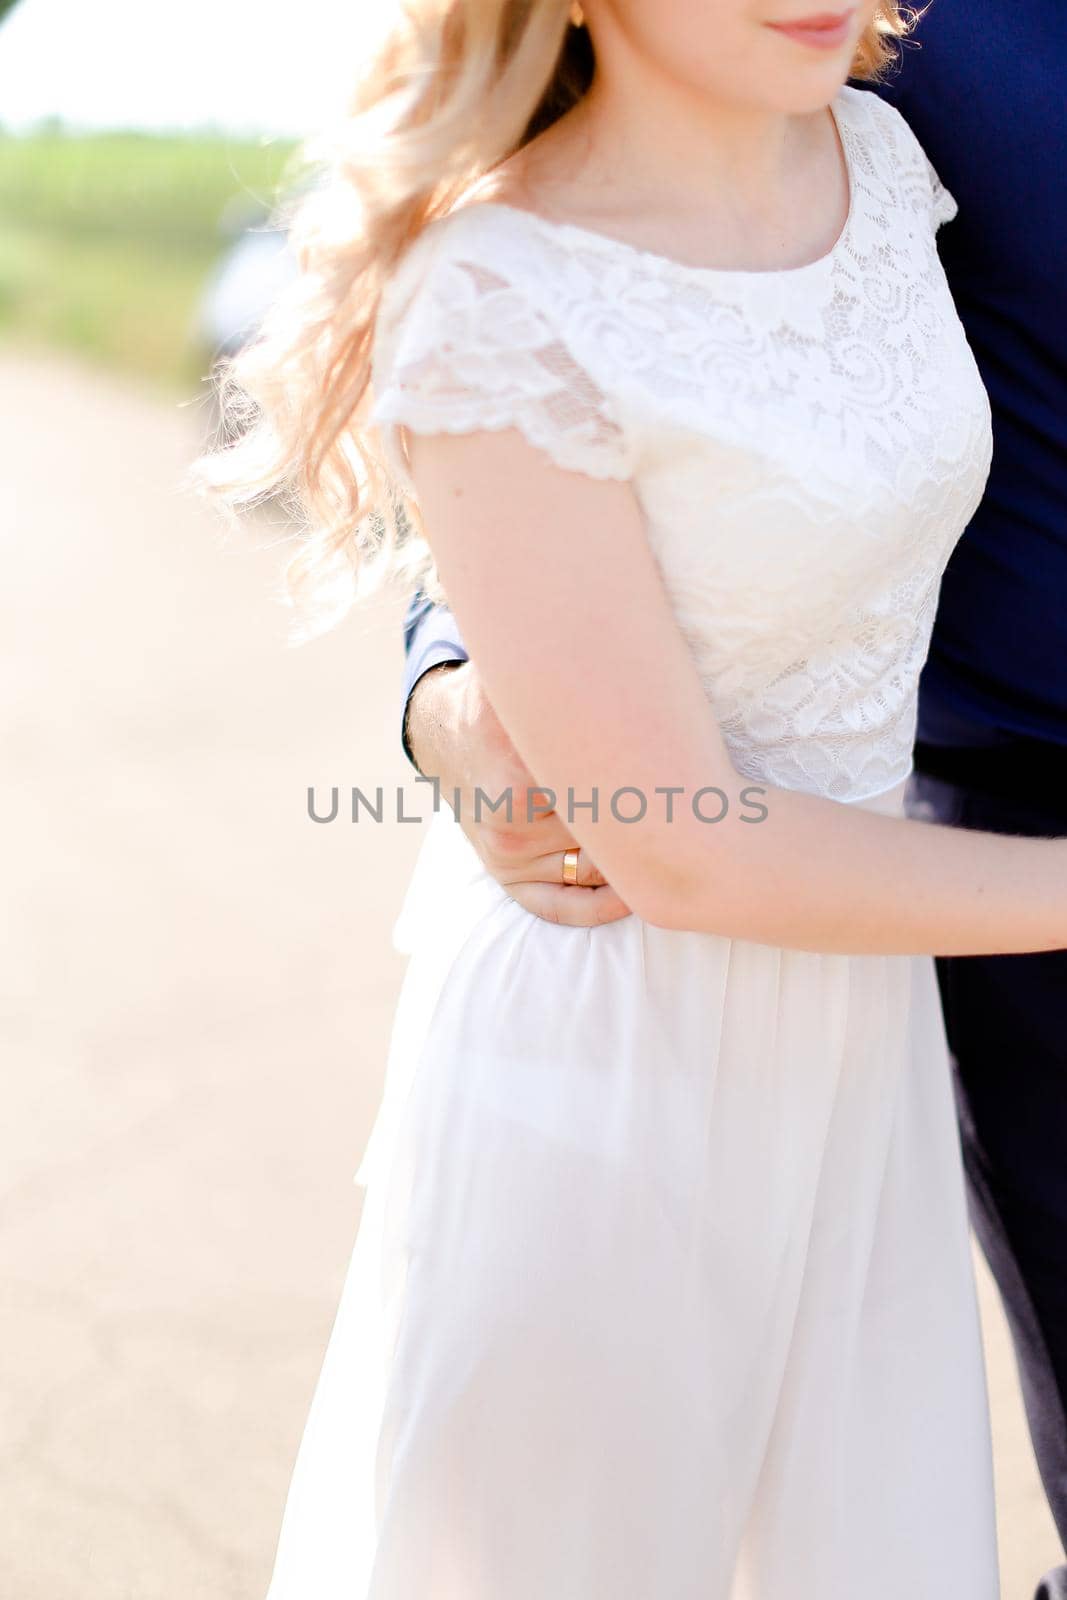 Groom hugging bride and walking on road. Concept of married couple and love.